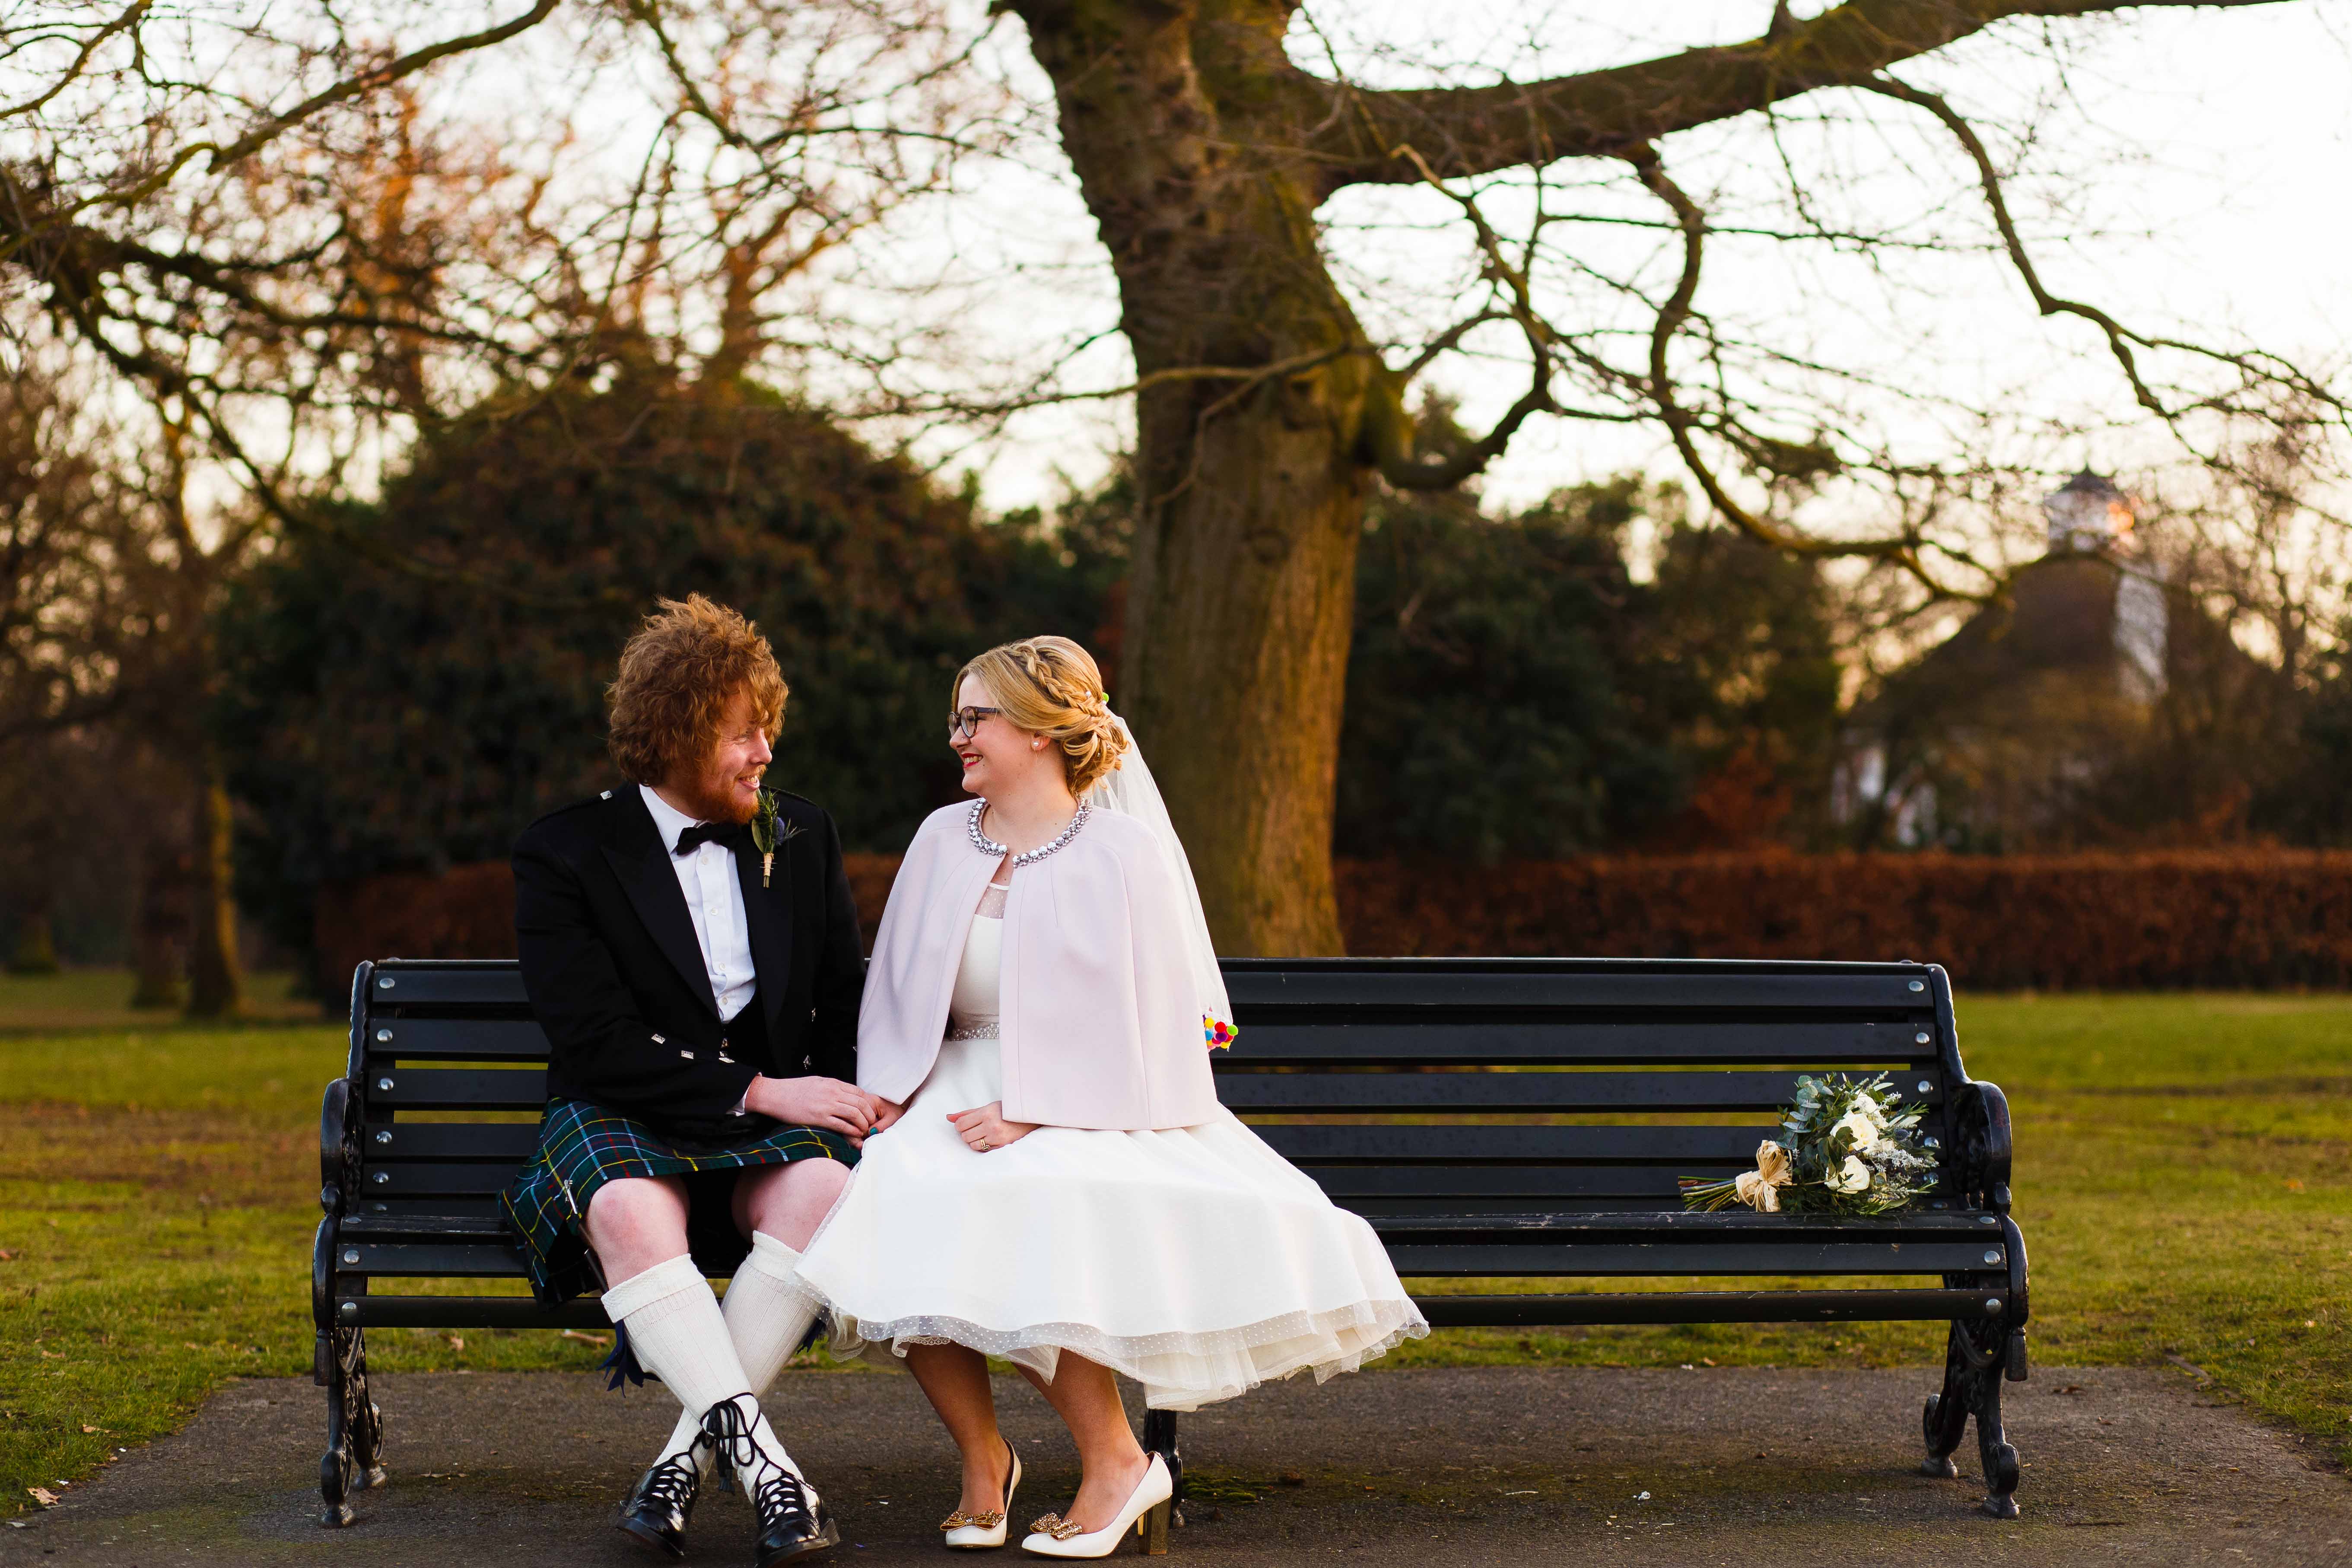 Marries couple sit on bench during their wedding portraits